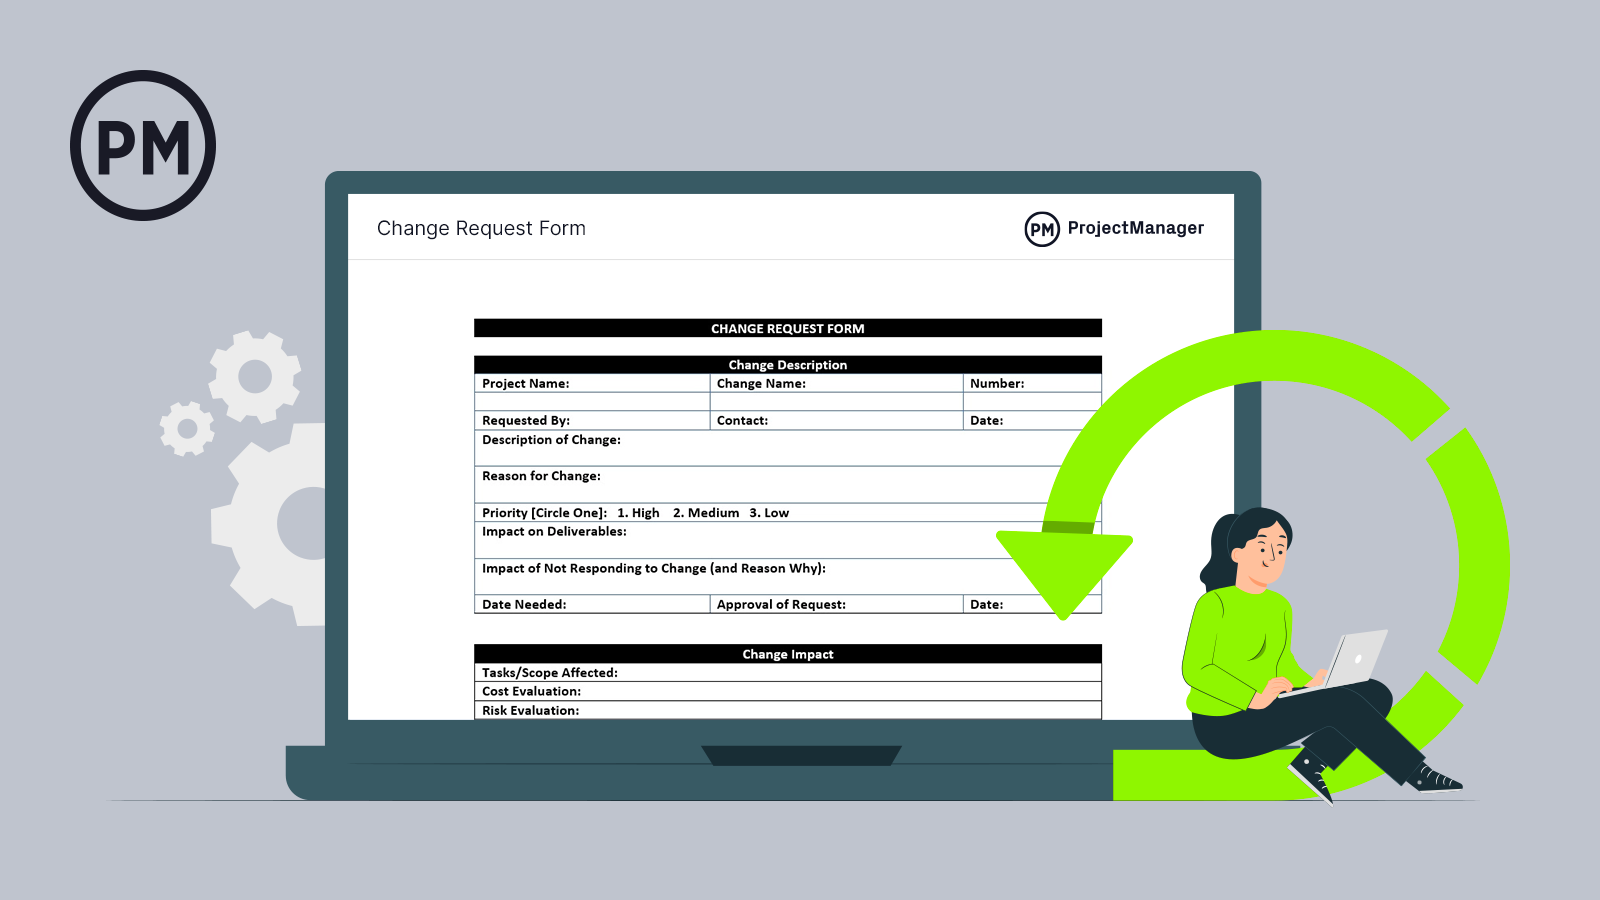 Change Request Form (Free Word Template) - ProjectManager